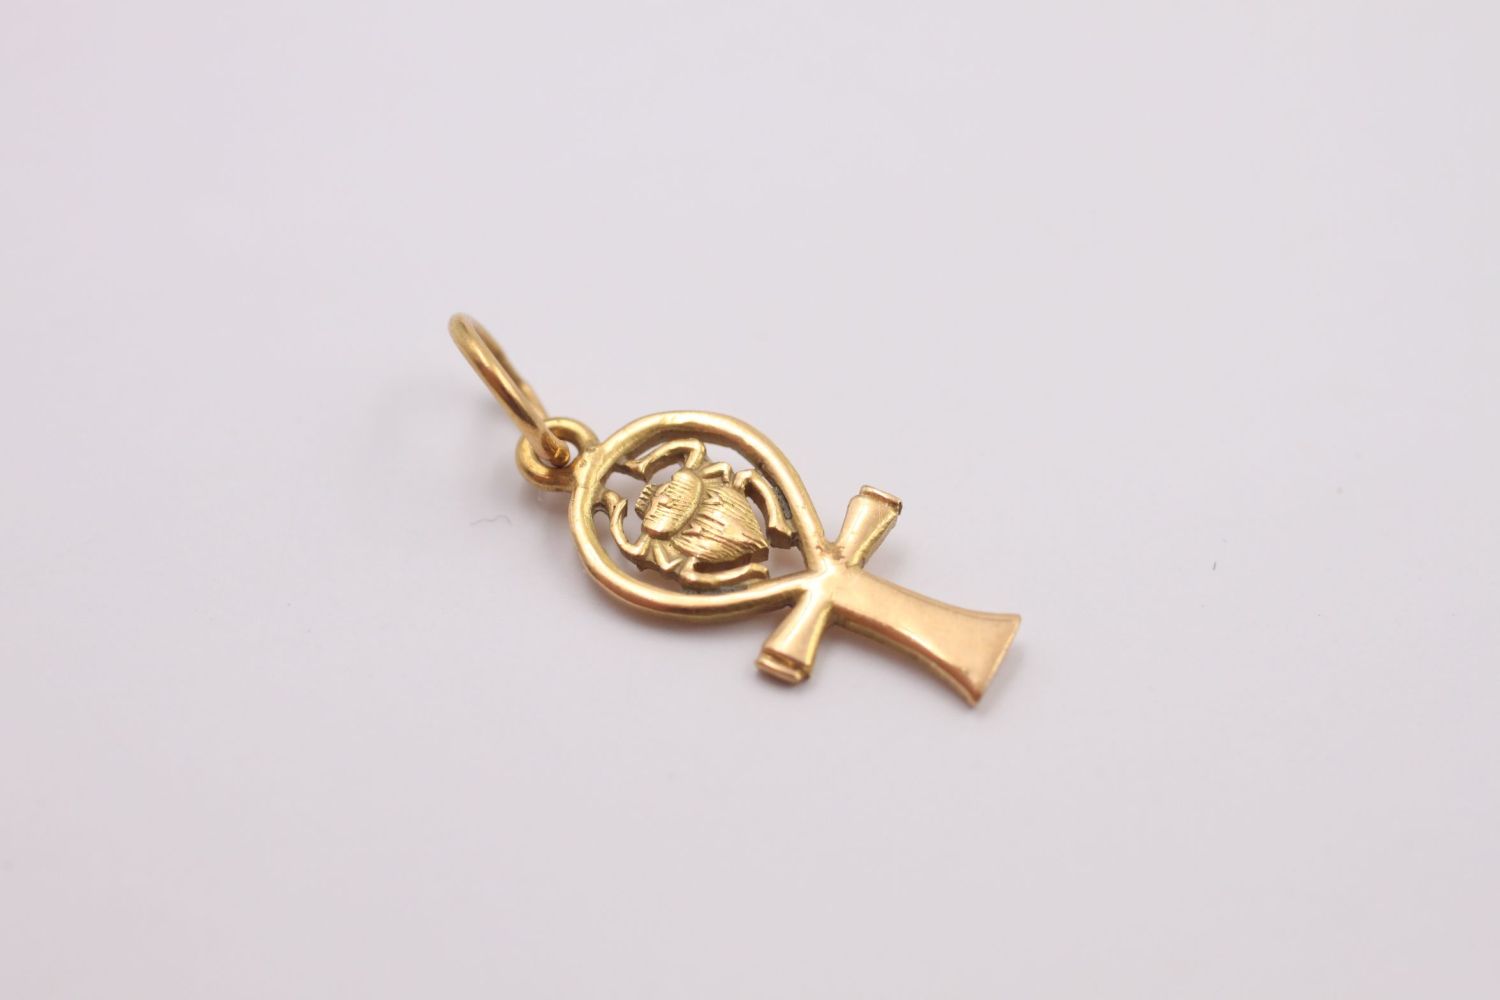 18ct gold Egyptian Ankh scarab pendant / charm 1 grams gross - Image 3 of 4